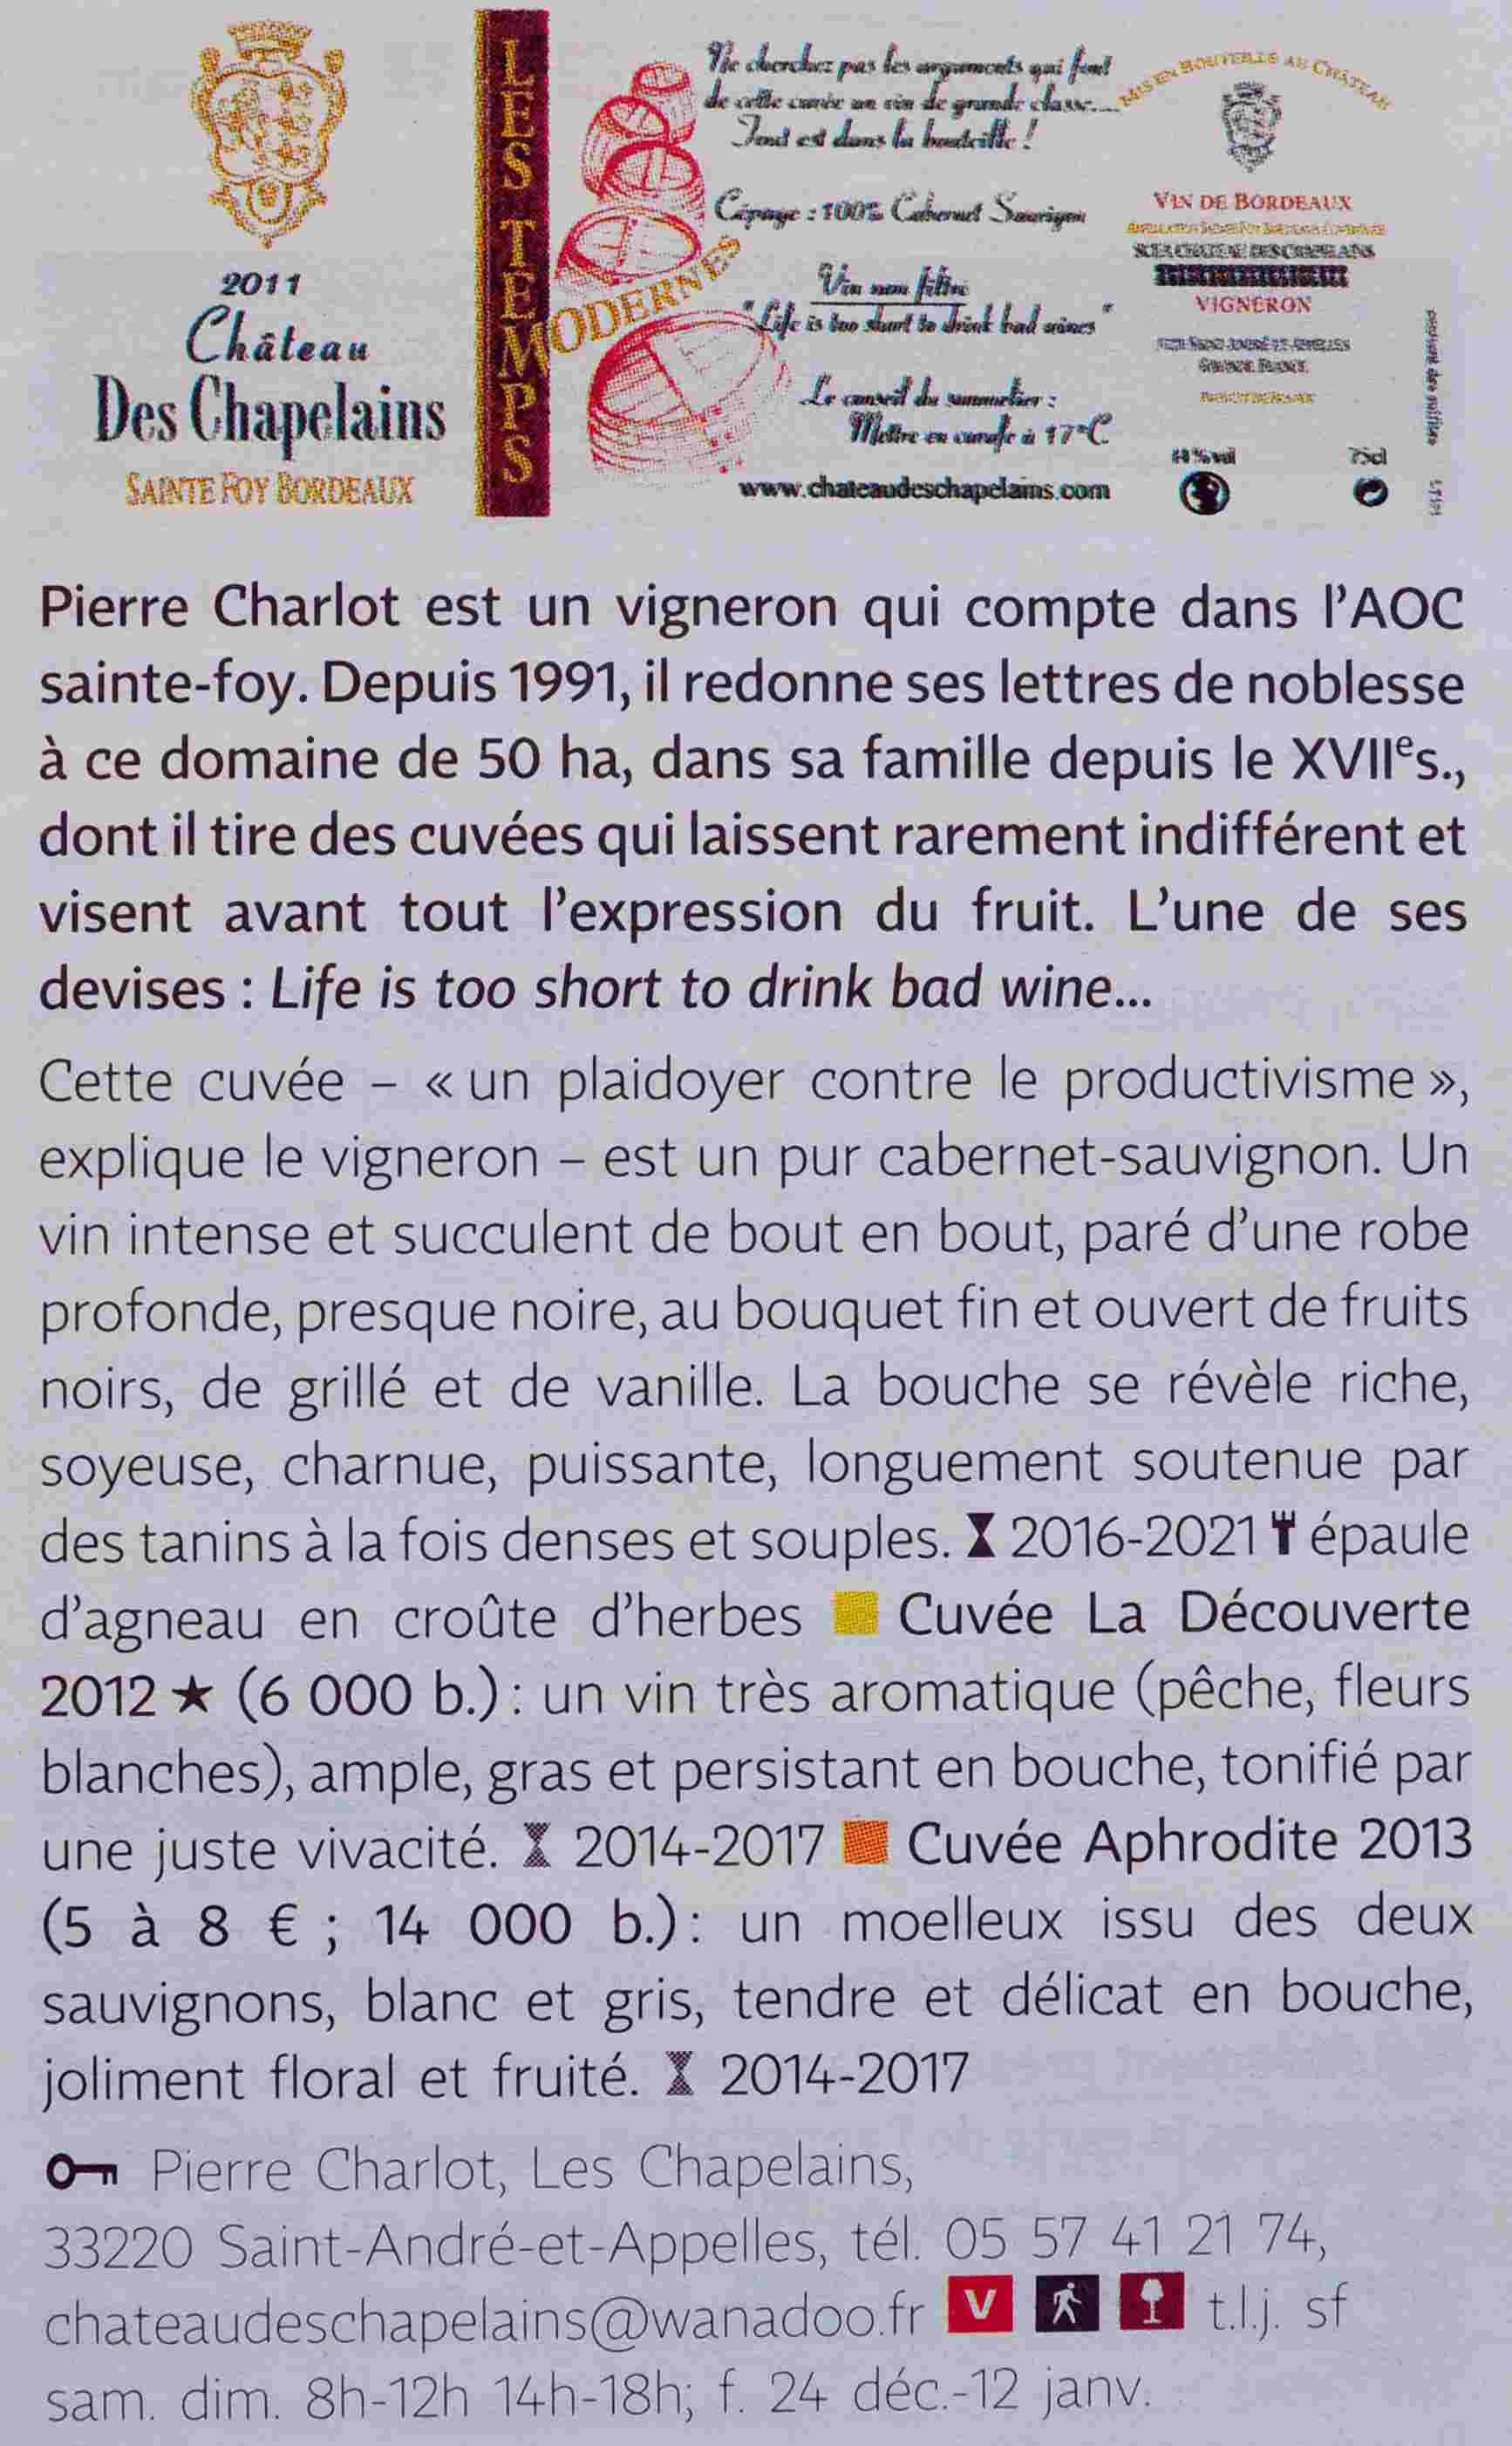 Les Chapelains have made an appearance in the Guide Hachette every year since 1994 and we have won a ‘Coup de Coeur’ award two years in a row!